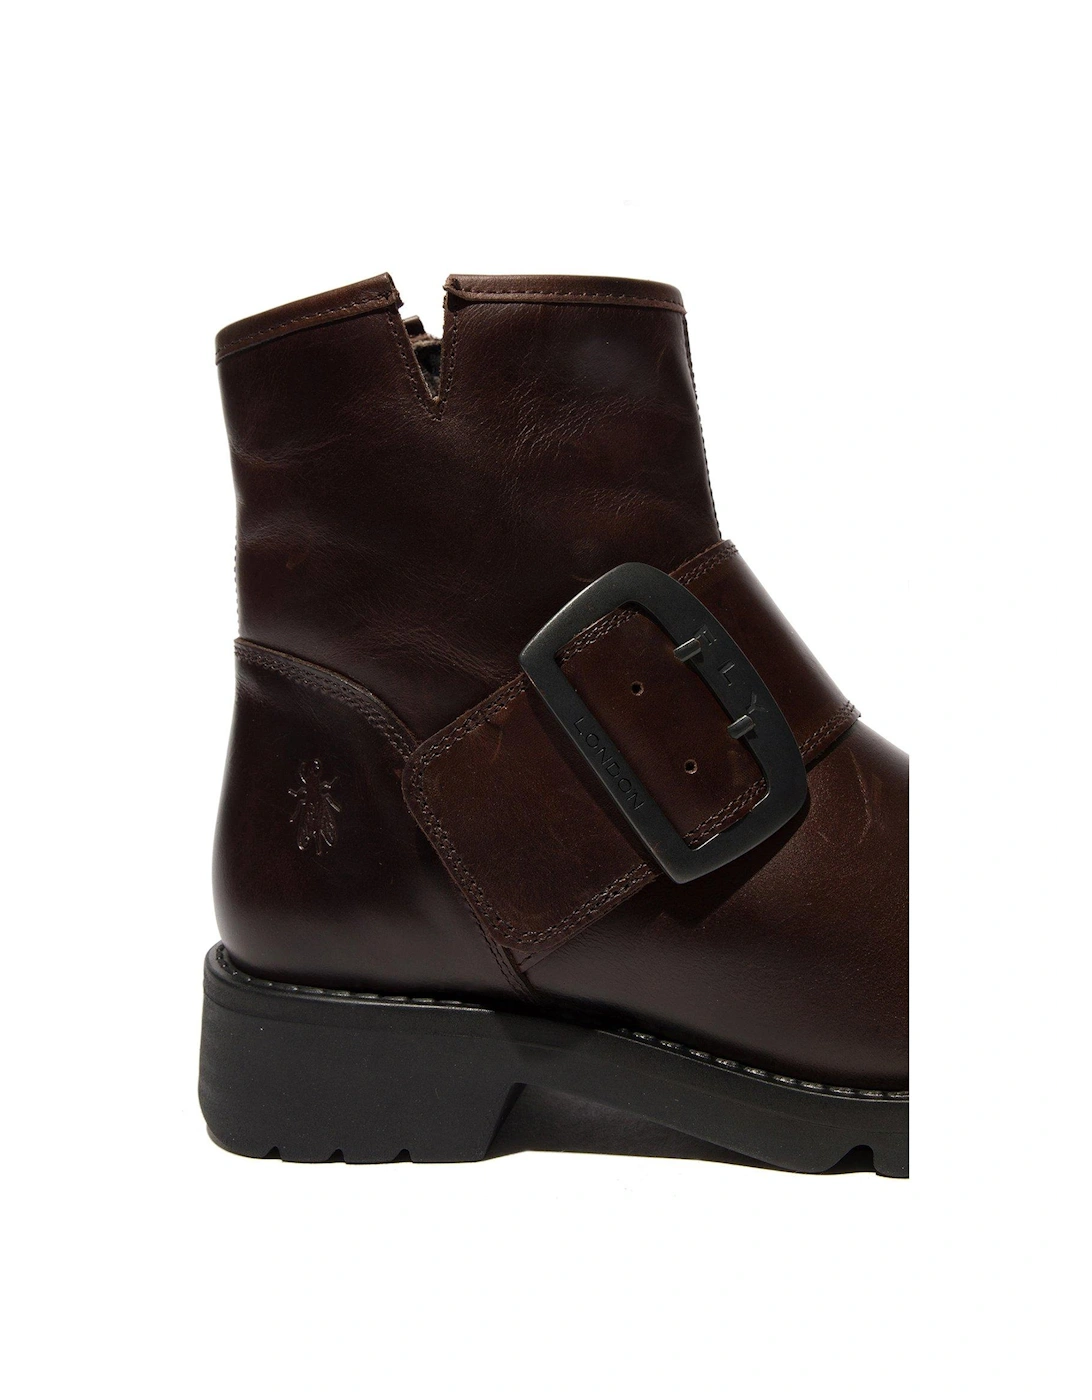 Rily991 Buckle Ankle Boots - Dark Brown